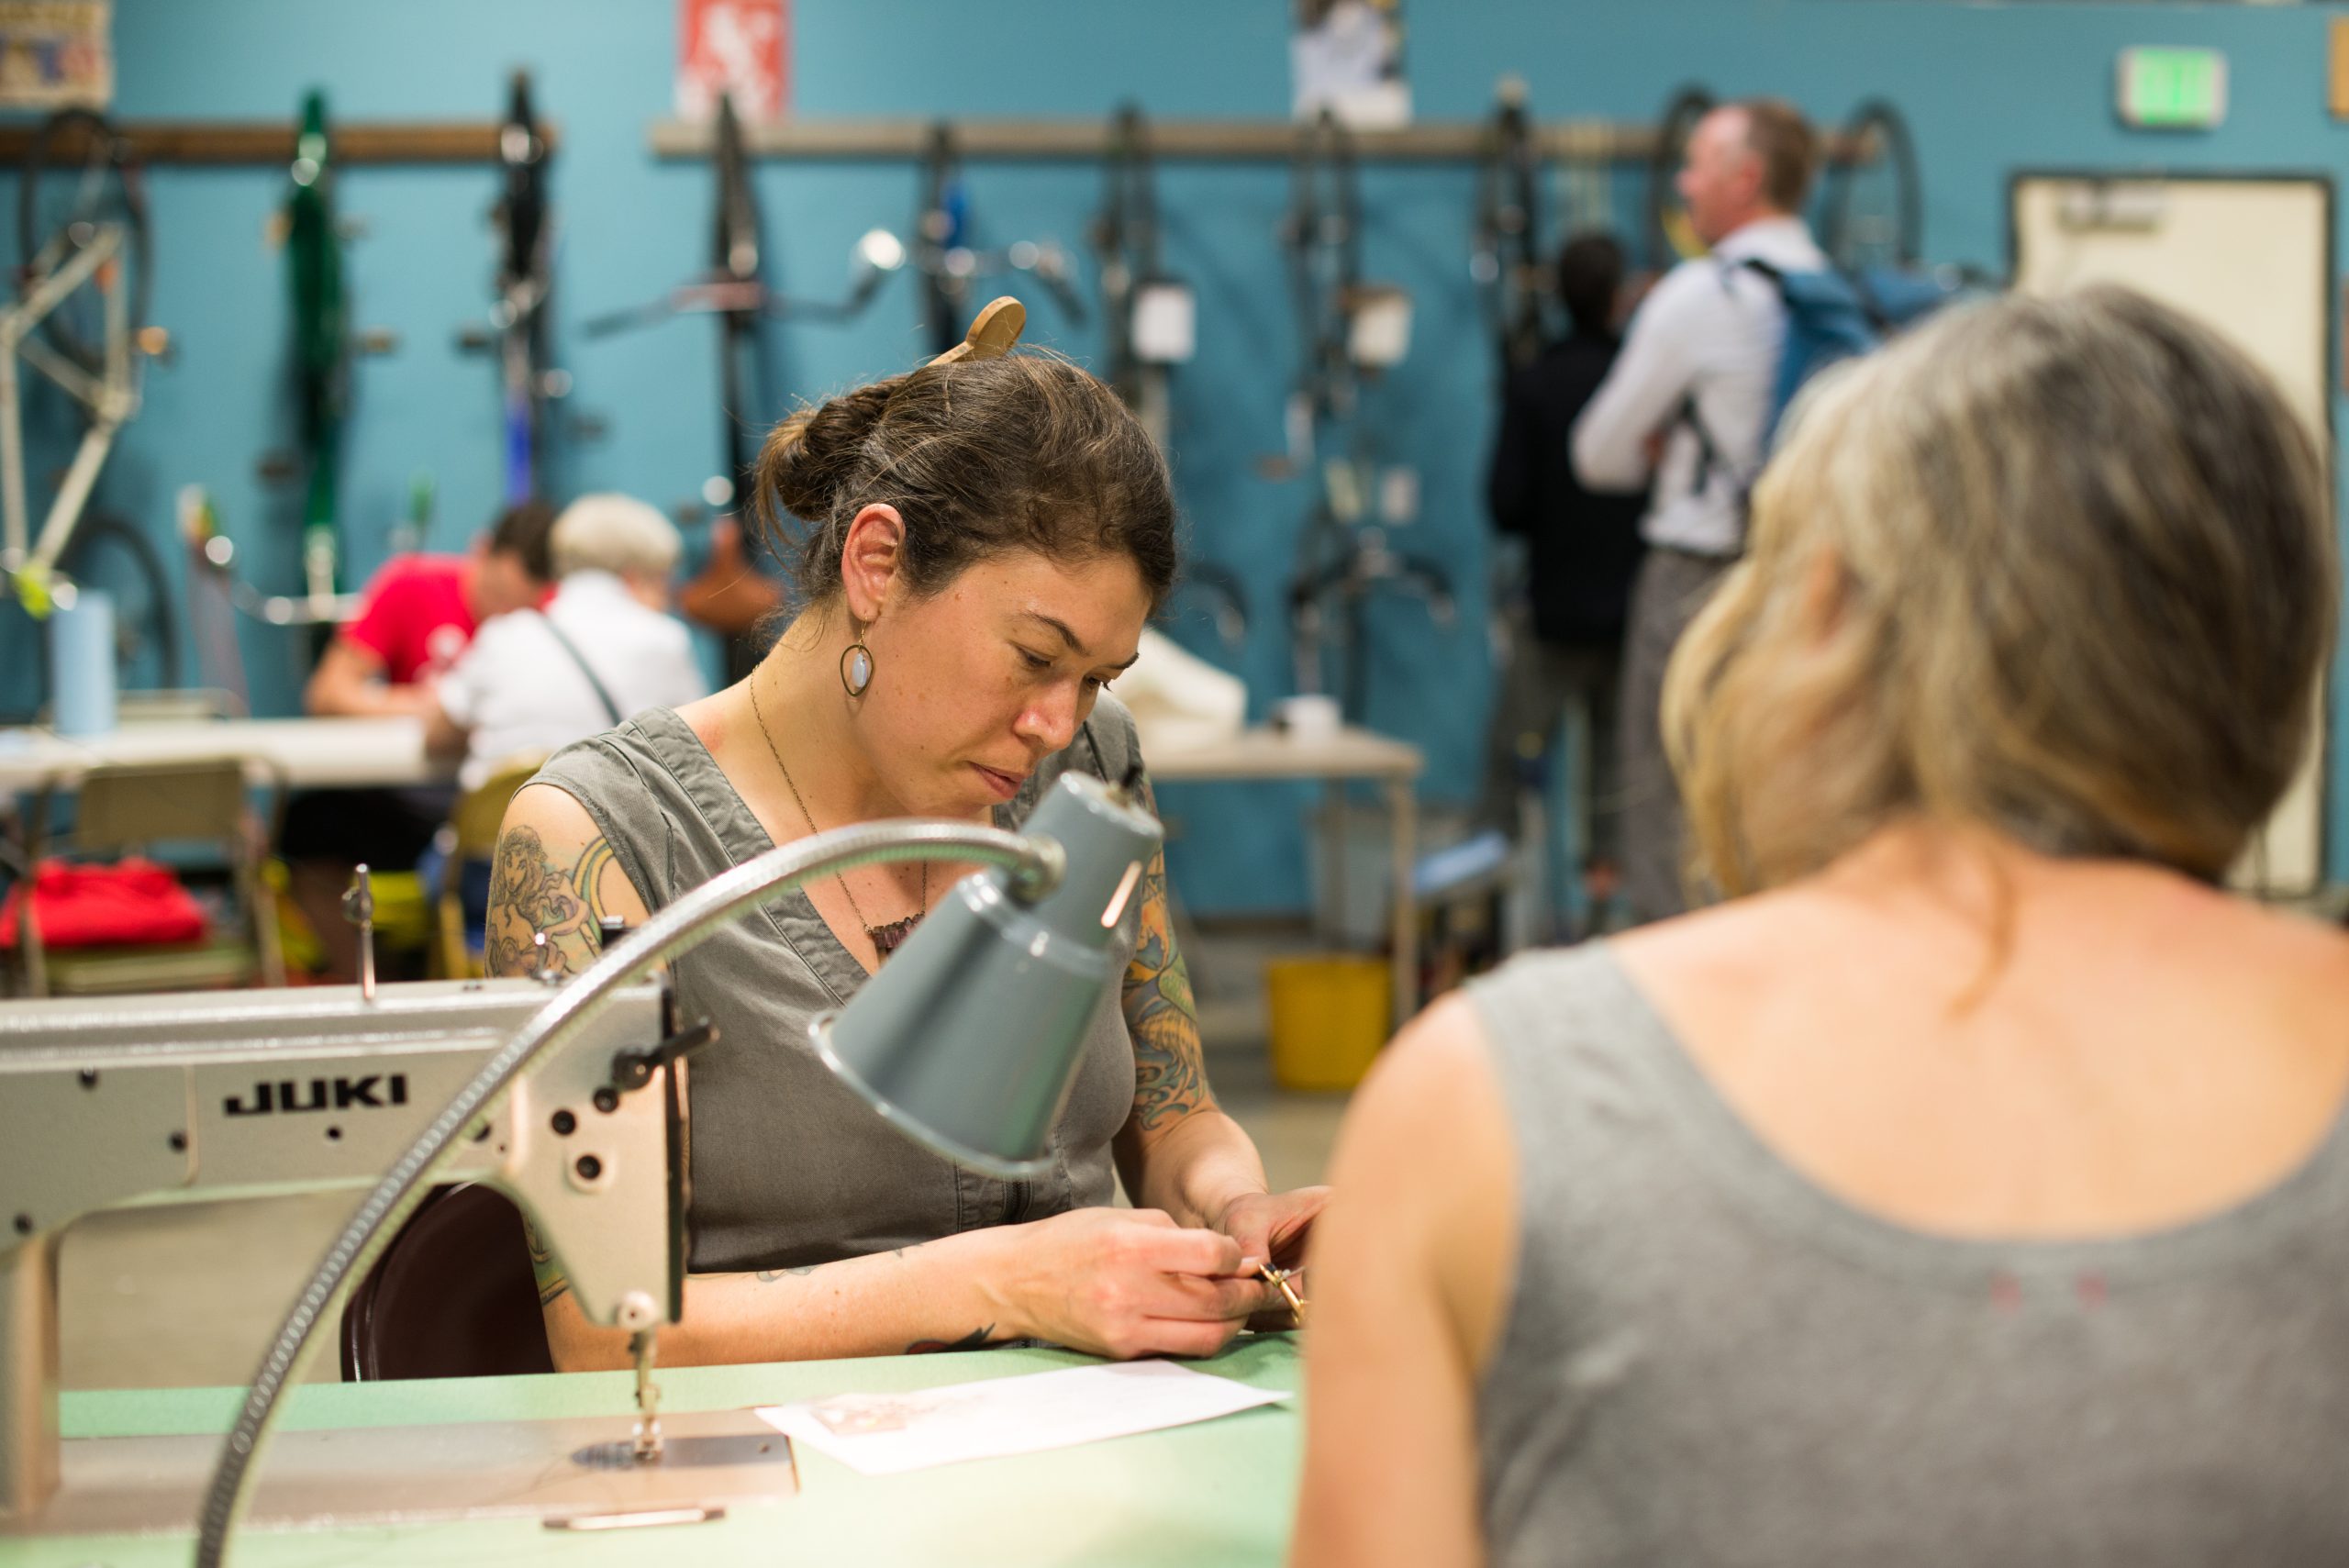 Portland's circular economy. Repair cafes (like the one pictured) are community gathering where people work on repairing objects of everyday life such as electrical and mechanical devices, computers, bicycles, clothing, and other items. Credit: Portland Bureau of Planning and Sustainability